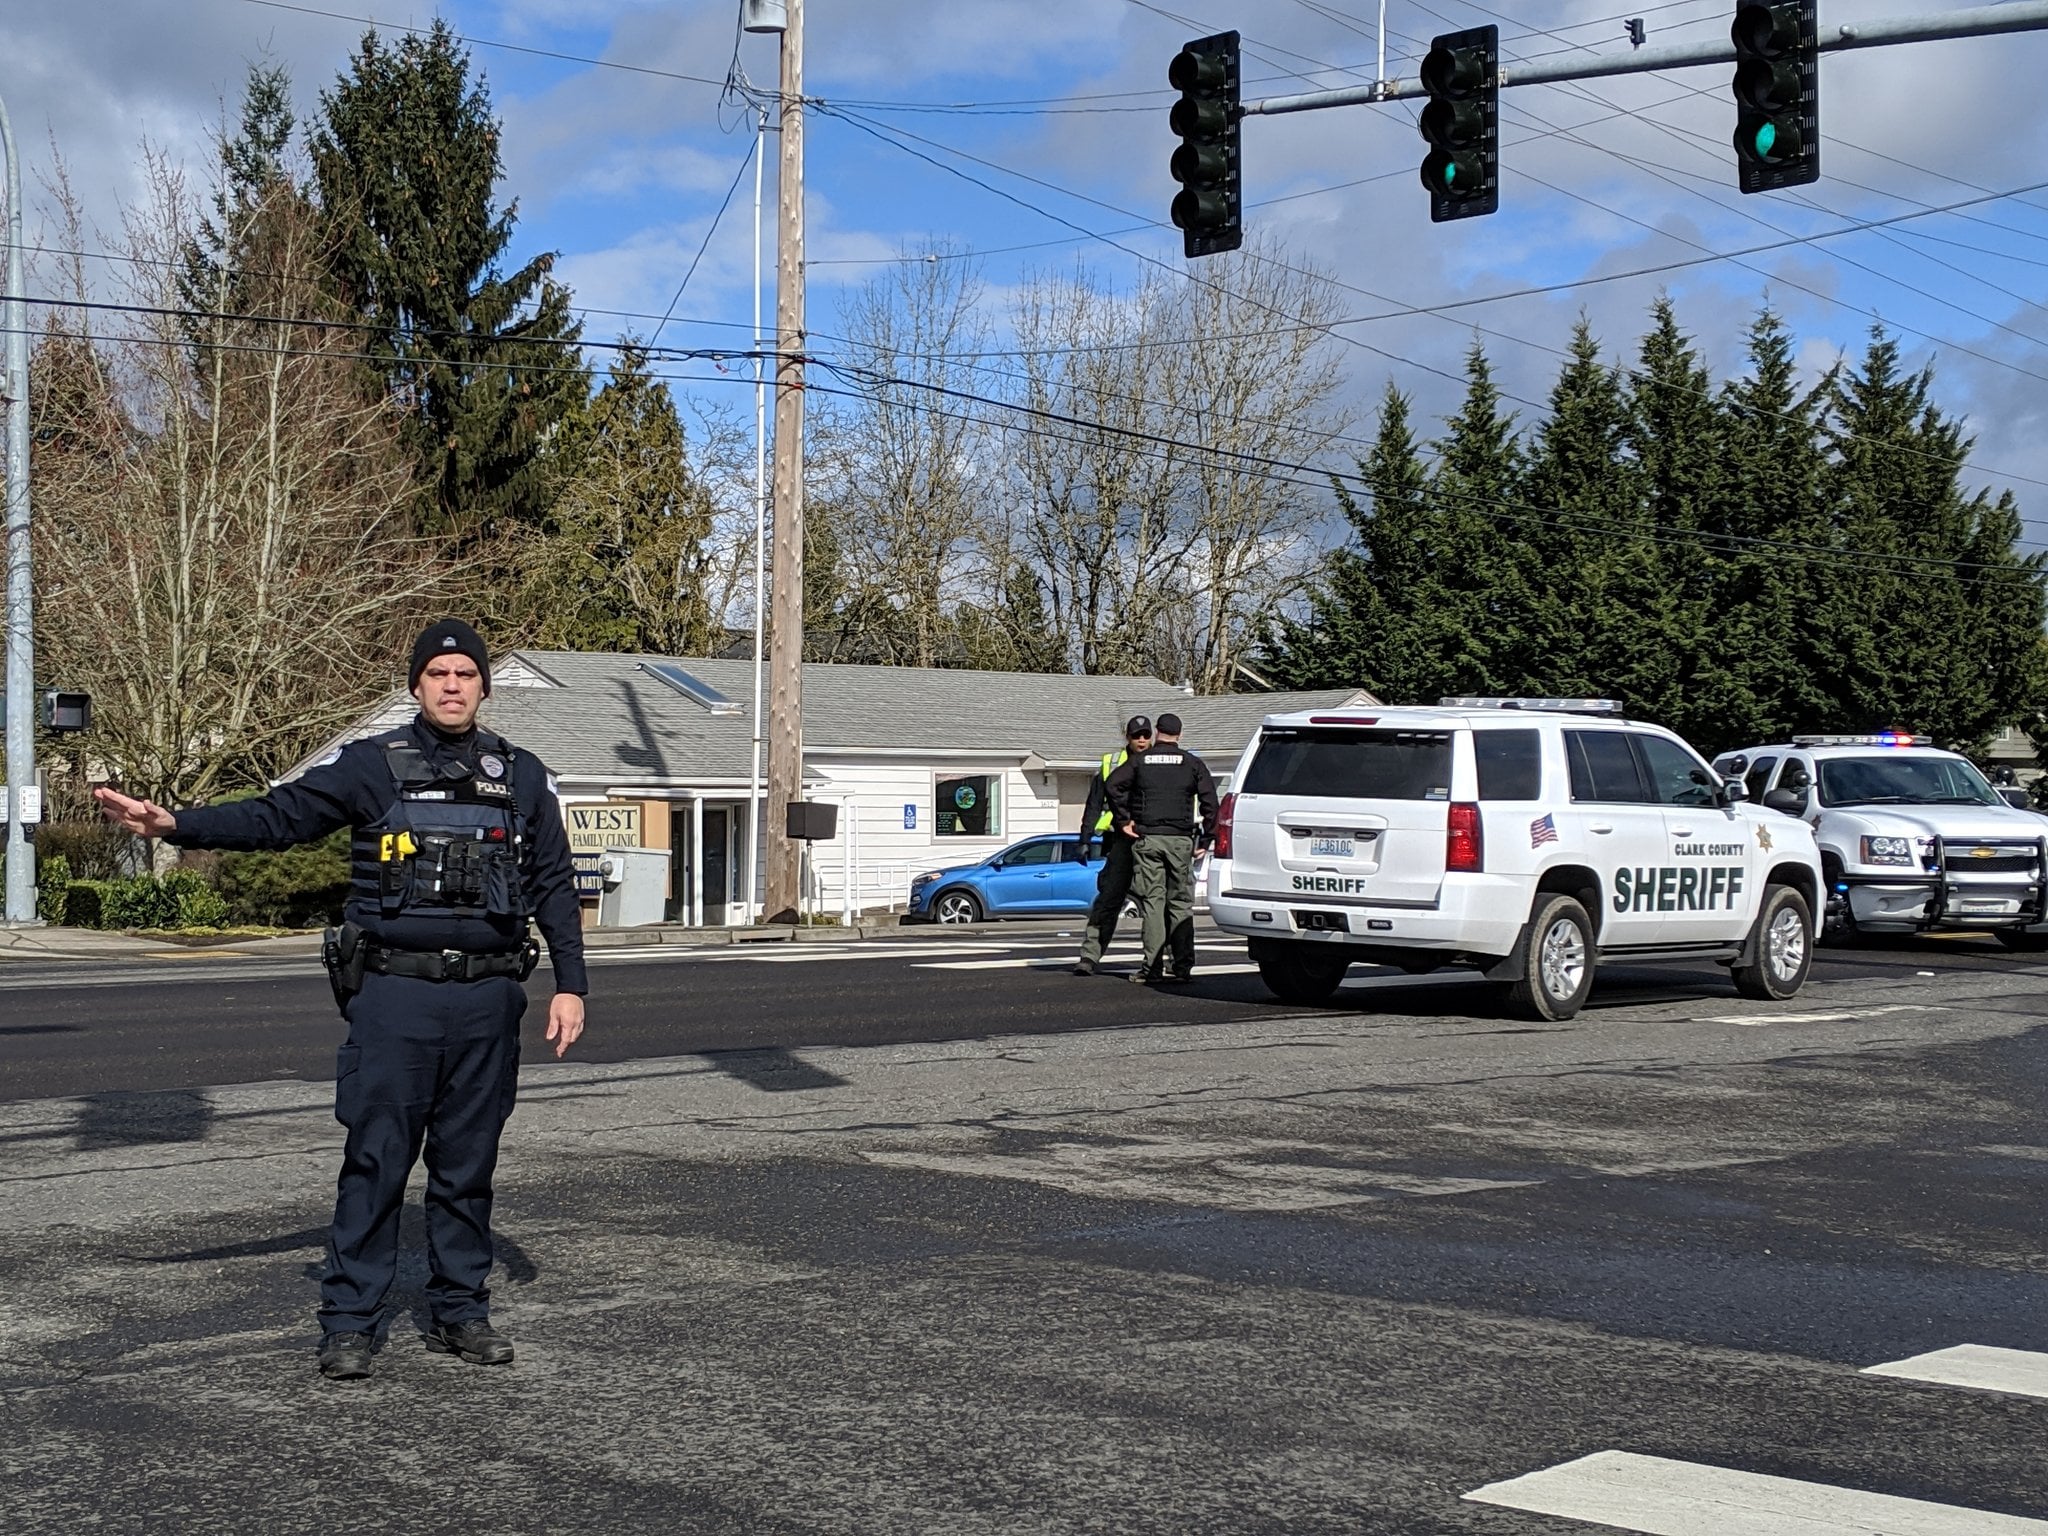 Clark County Sheriff's Office has closed Northeast 78th Street, a major east-west thoroughfare, through east Hazel Dell as it investigates an officer-involved shooting at the intersection of Northeast 25th Street.